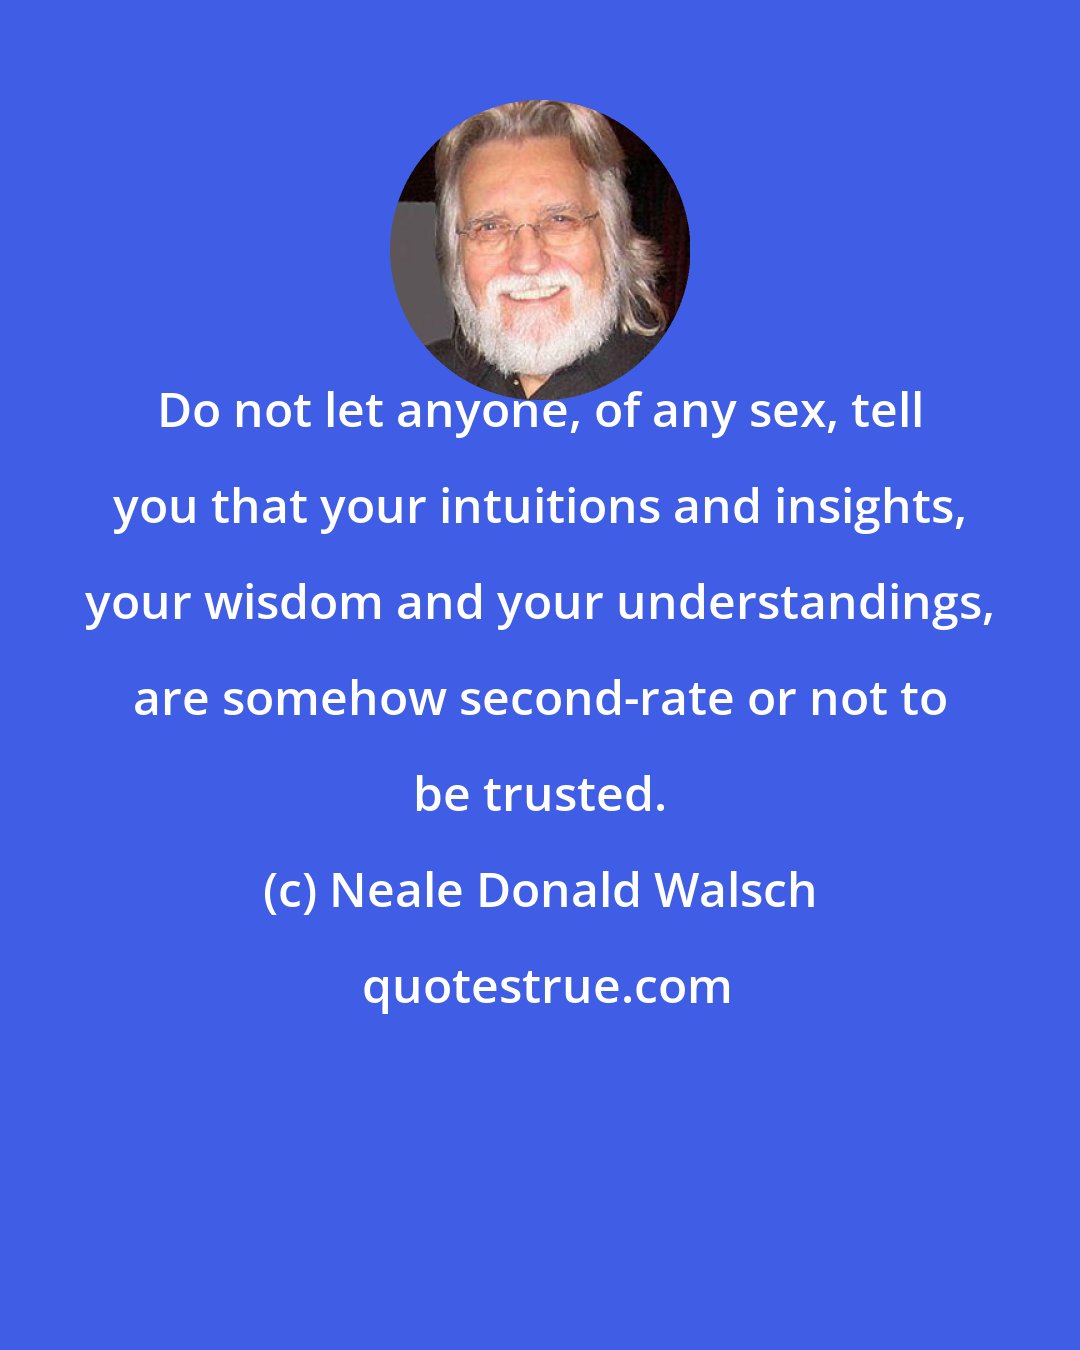 Neale Donald Walsch: Do not let anyone, of any sex, tell you that your intuitions and insights, your wisdom and your understandings, are somehow second-rate or not to be trusted.